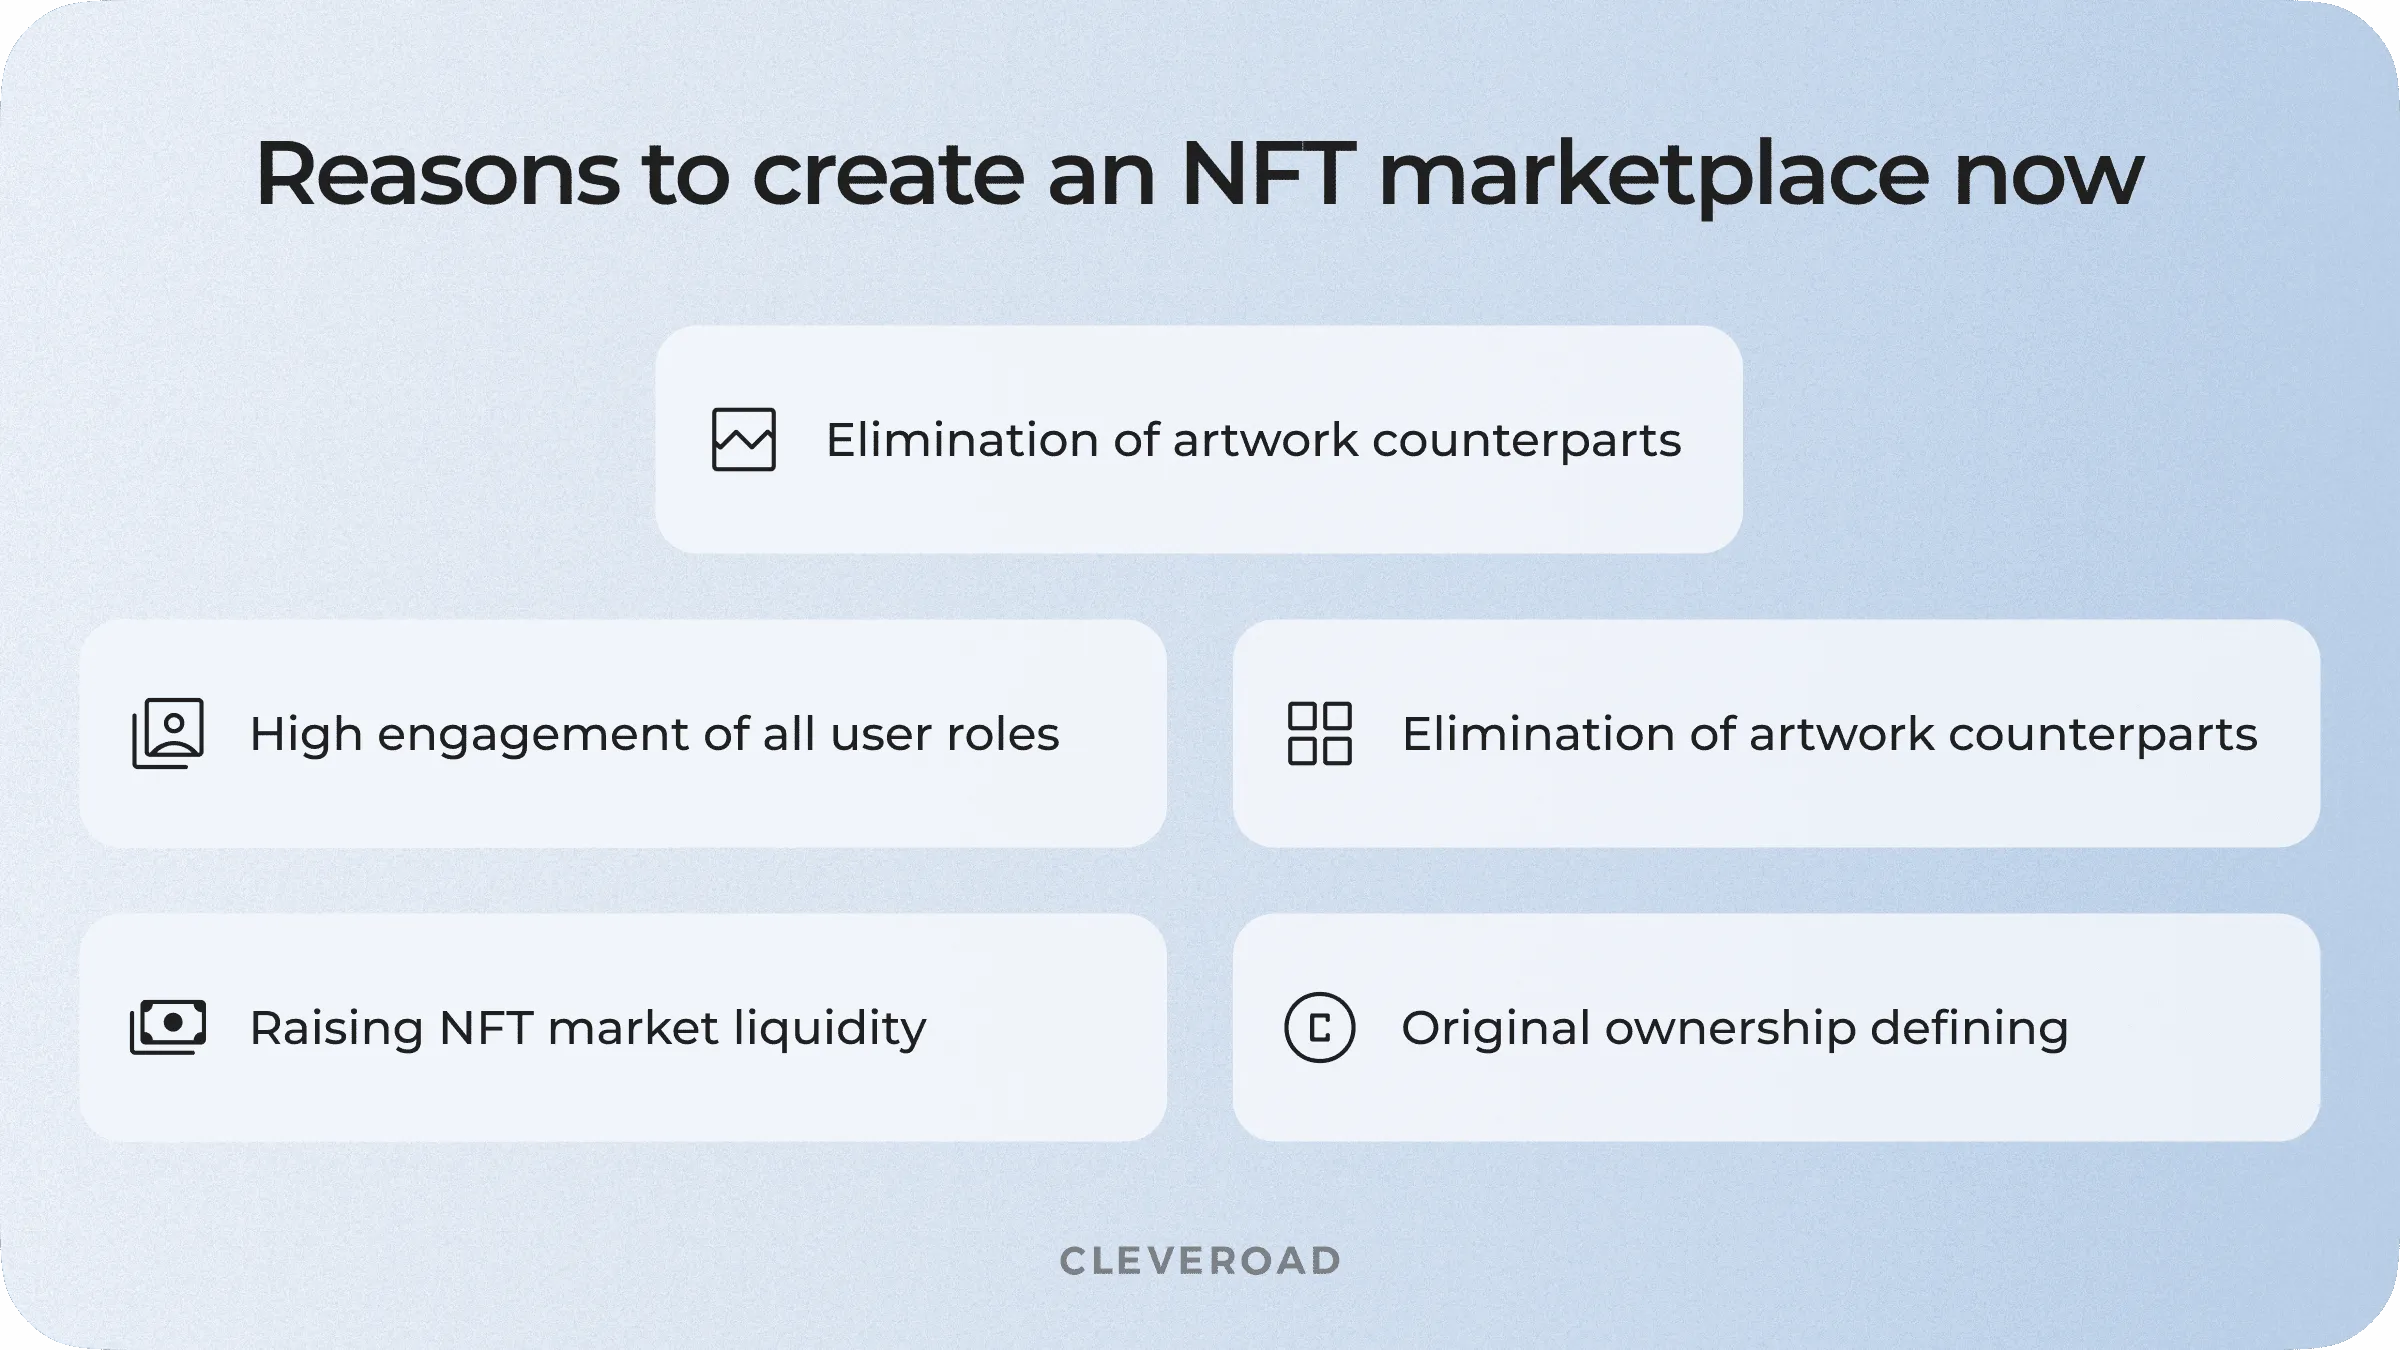 Reasons to create an NFT marketplace now